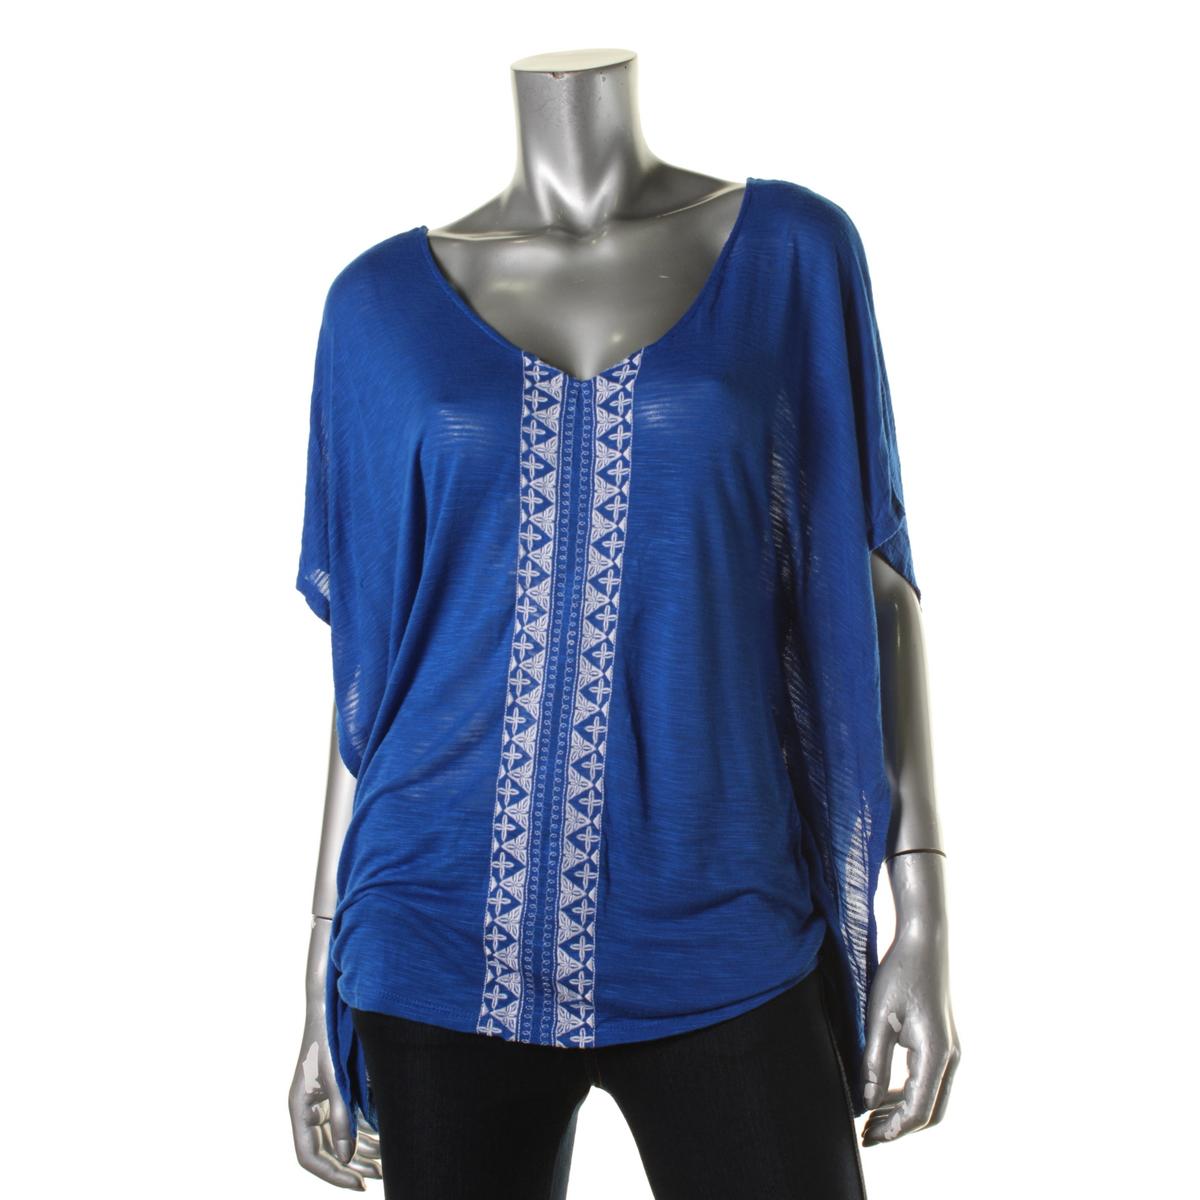 Cable & Gauge 4545 Womens Jersey Embroidered Poncho Top Shirt BHFO | eBay